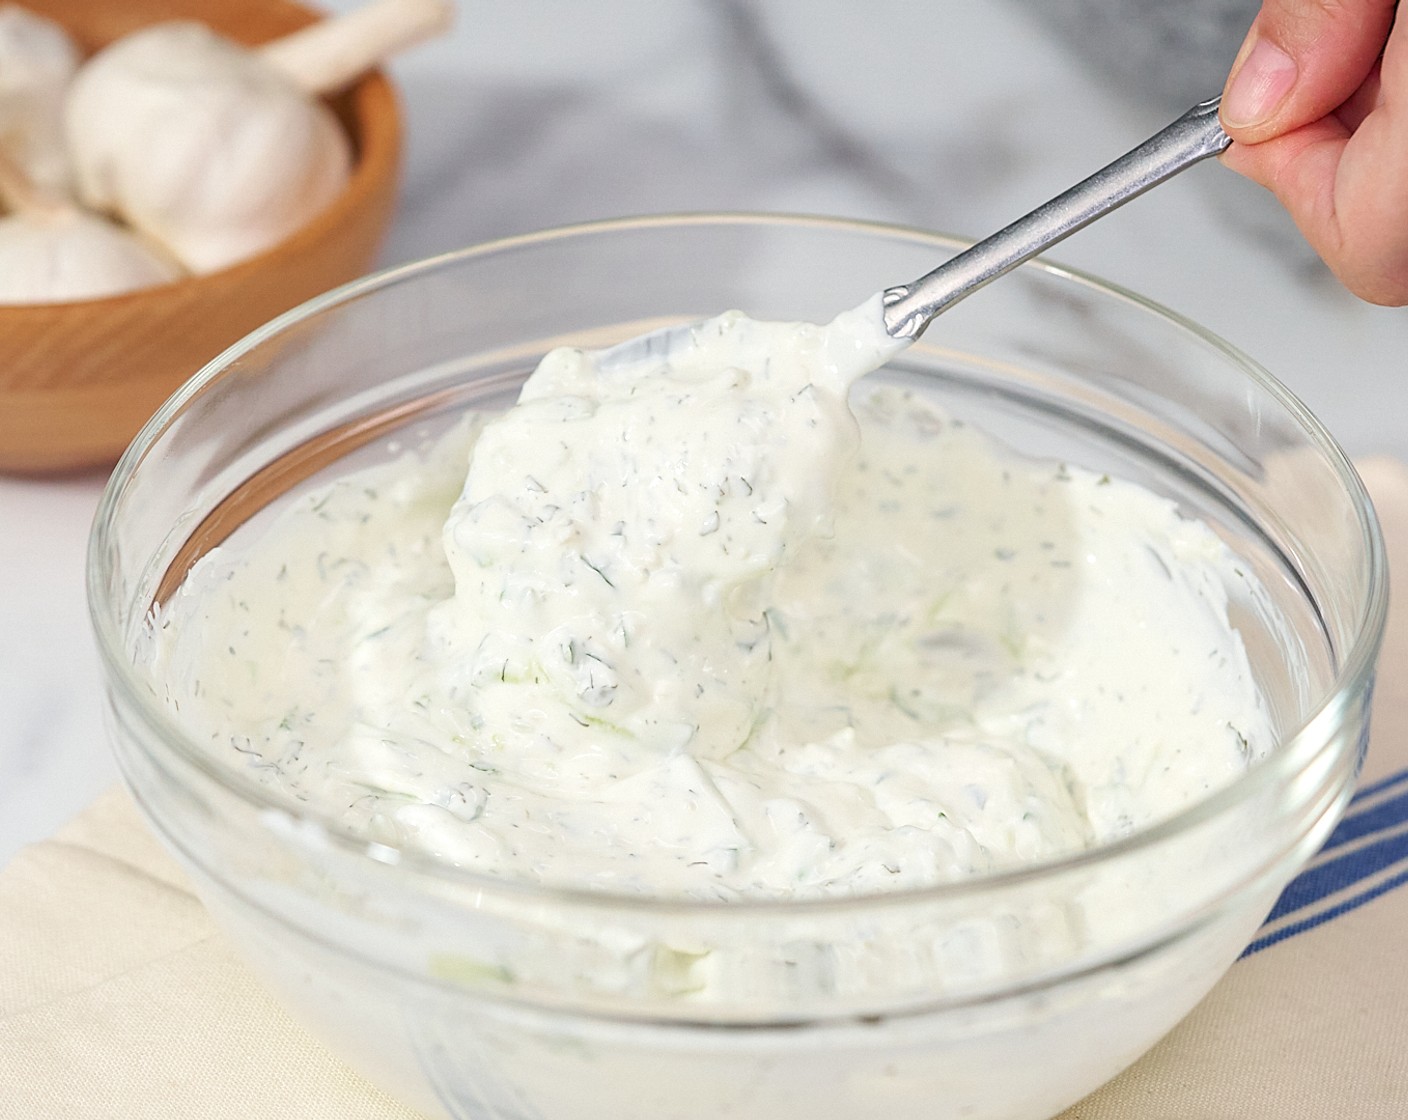 step 6 Add Greek Yogurt (1 cup), Mayonnaise (1/4 cup), 1 Tbsp of Lemon (1), Garlic (2 cloves), Dried Parsley (1 tsp), and Dried Dill Weed (1/2 tsp) to the bowl and stir to combine.